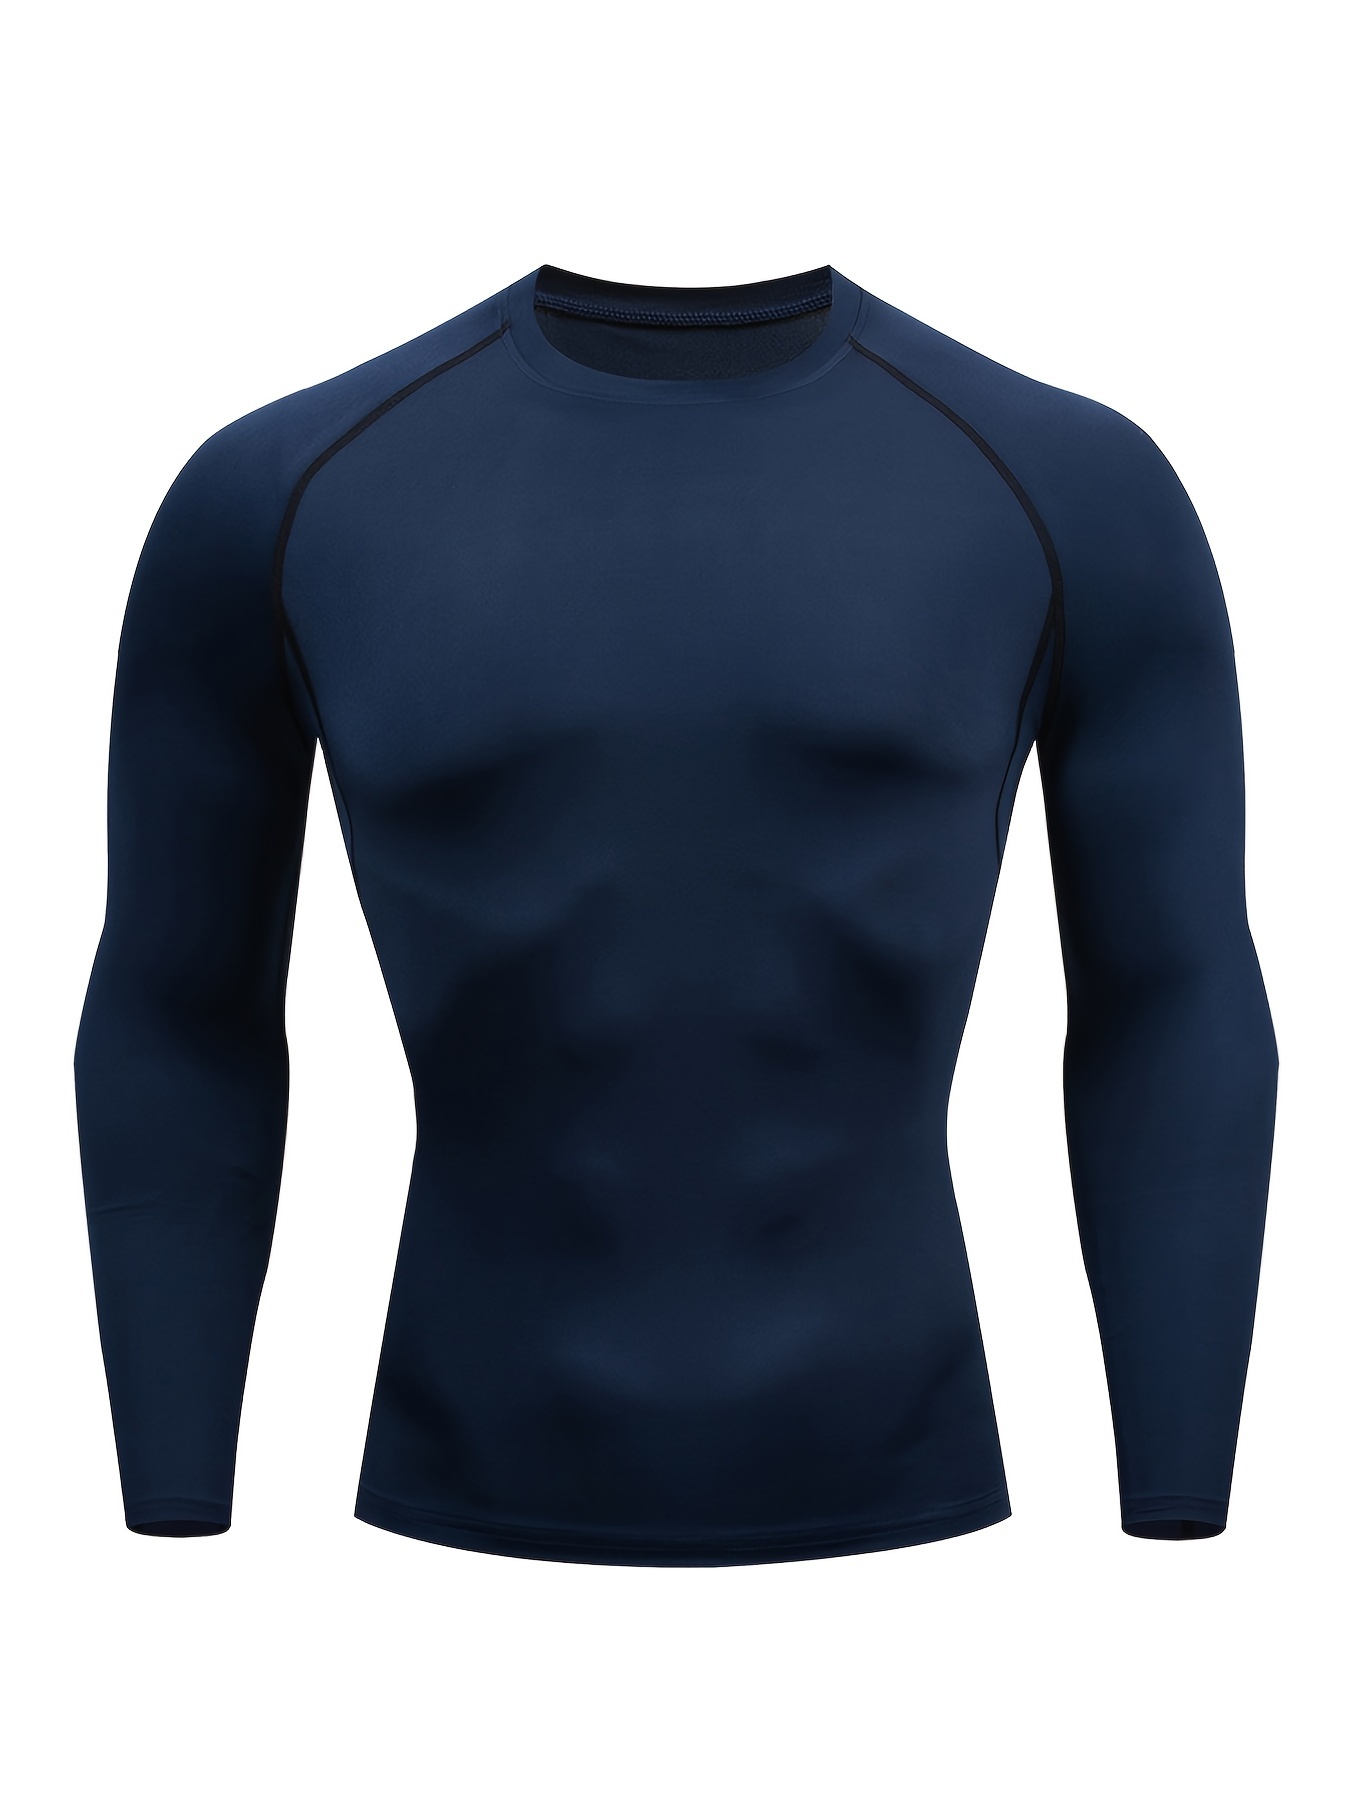 4pcs Compression High Neck Shirts, Men's Long Sleeve Athletic Moisture  Wicking Base Layer Undershirt Shirt For Sports Workout